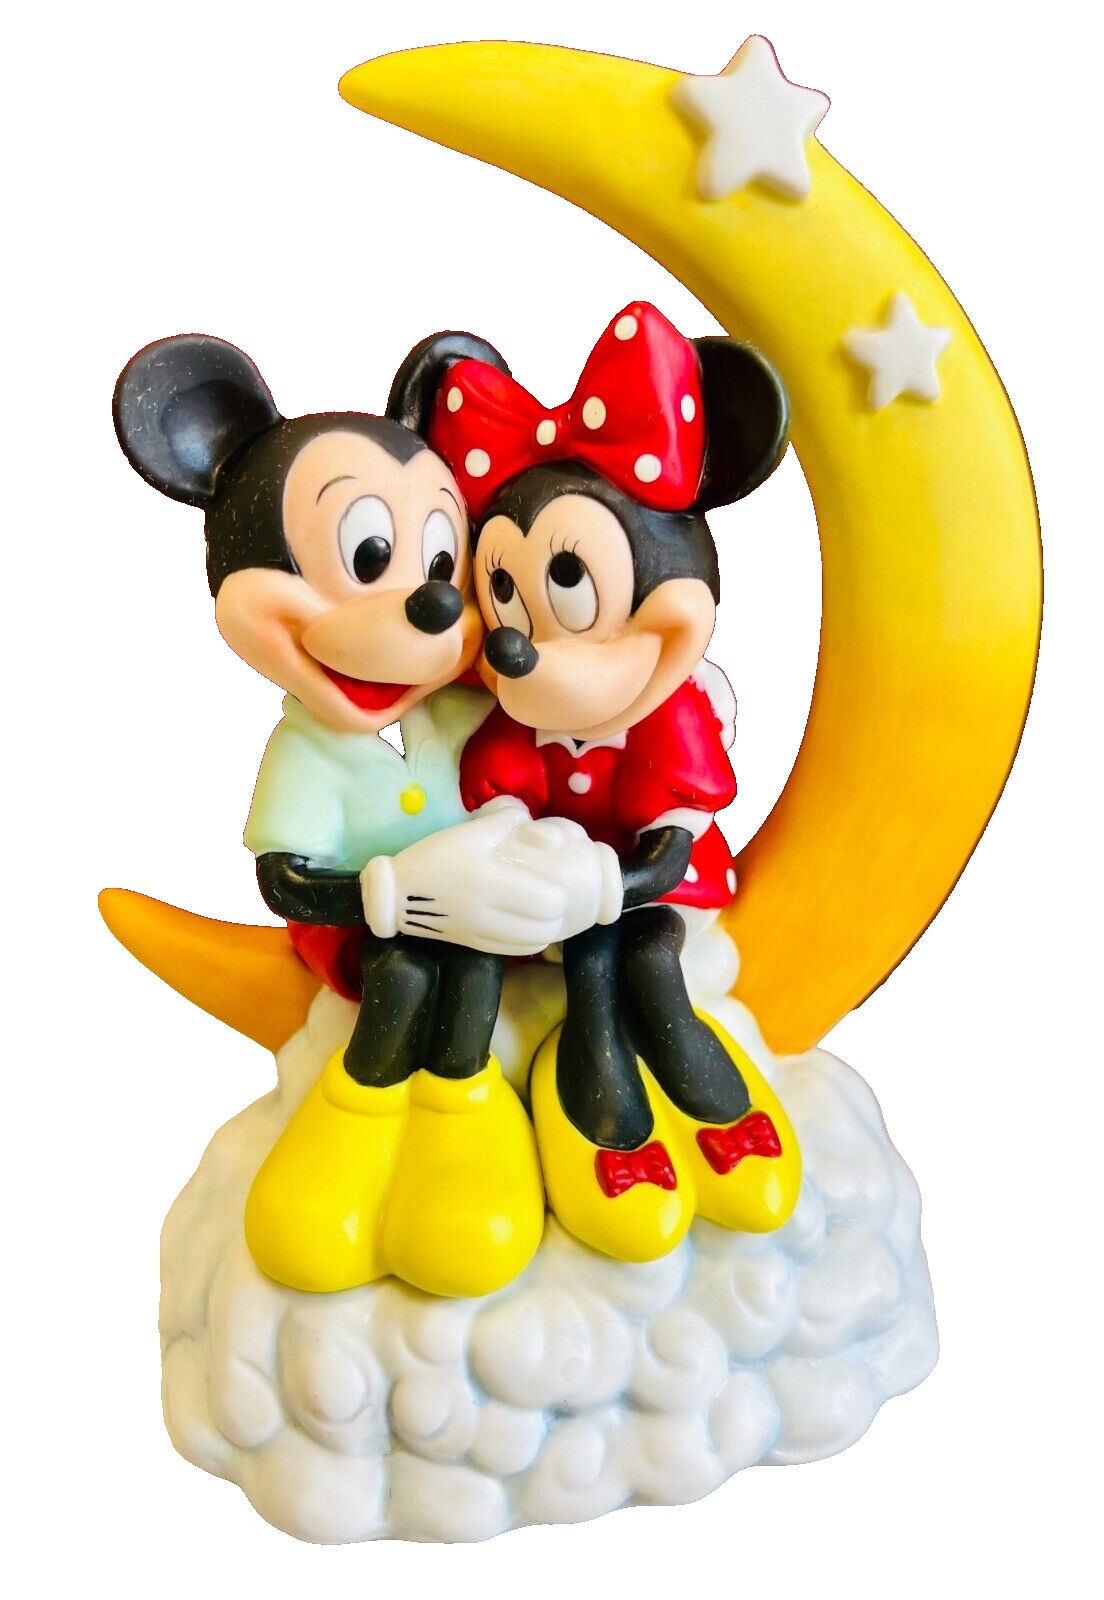 Disney Mickey and Minnie Moon Musical Figurine Plays “When You Wish Upon a Star”